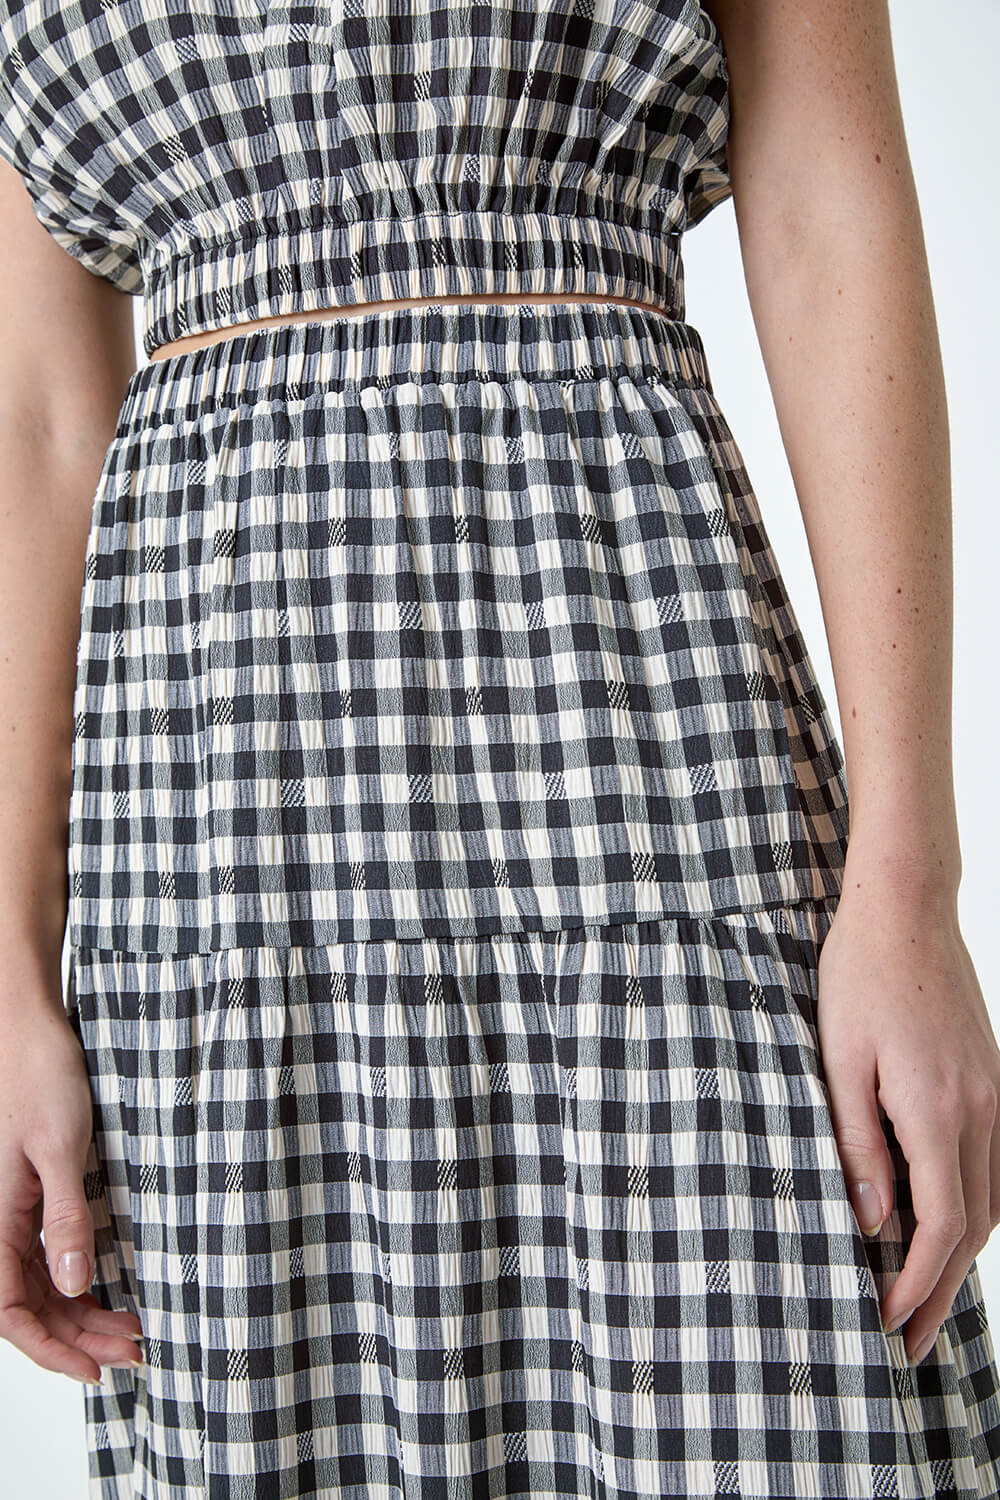 Black Gingham Check Tiered Maxi Skirt, Image 5 of 7